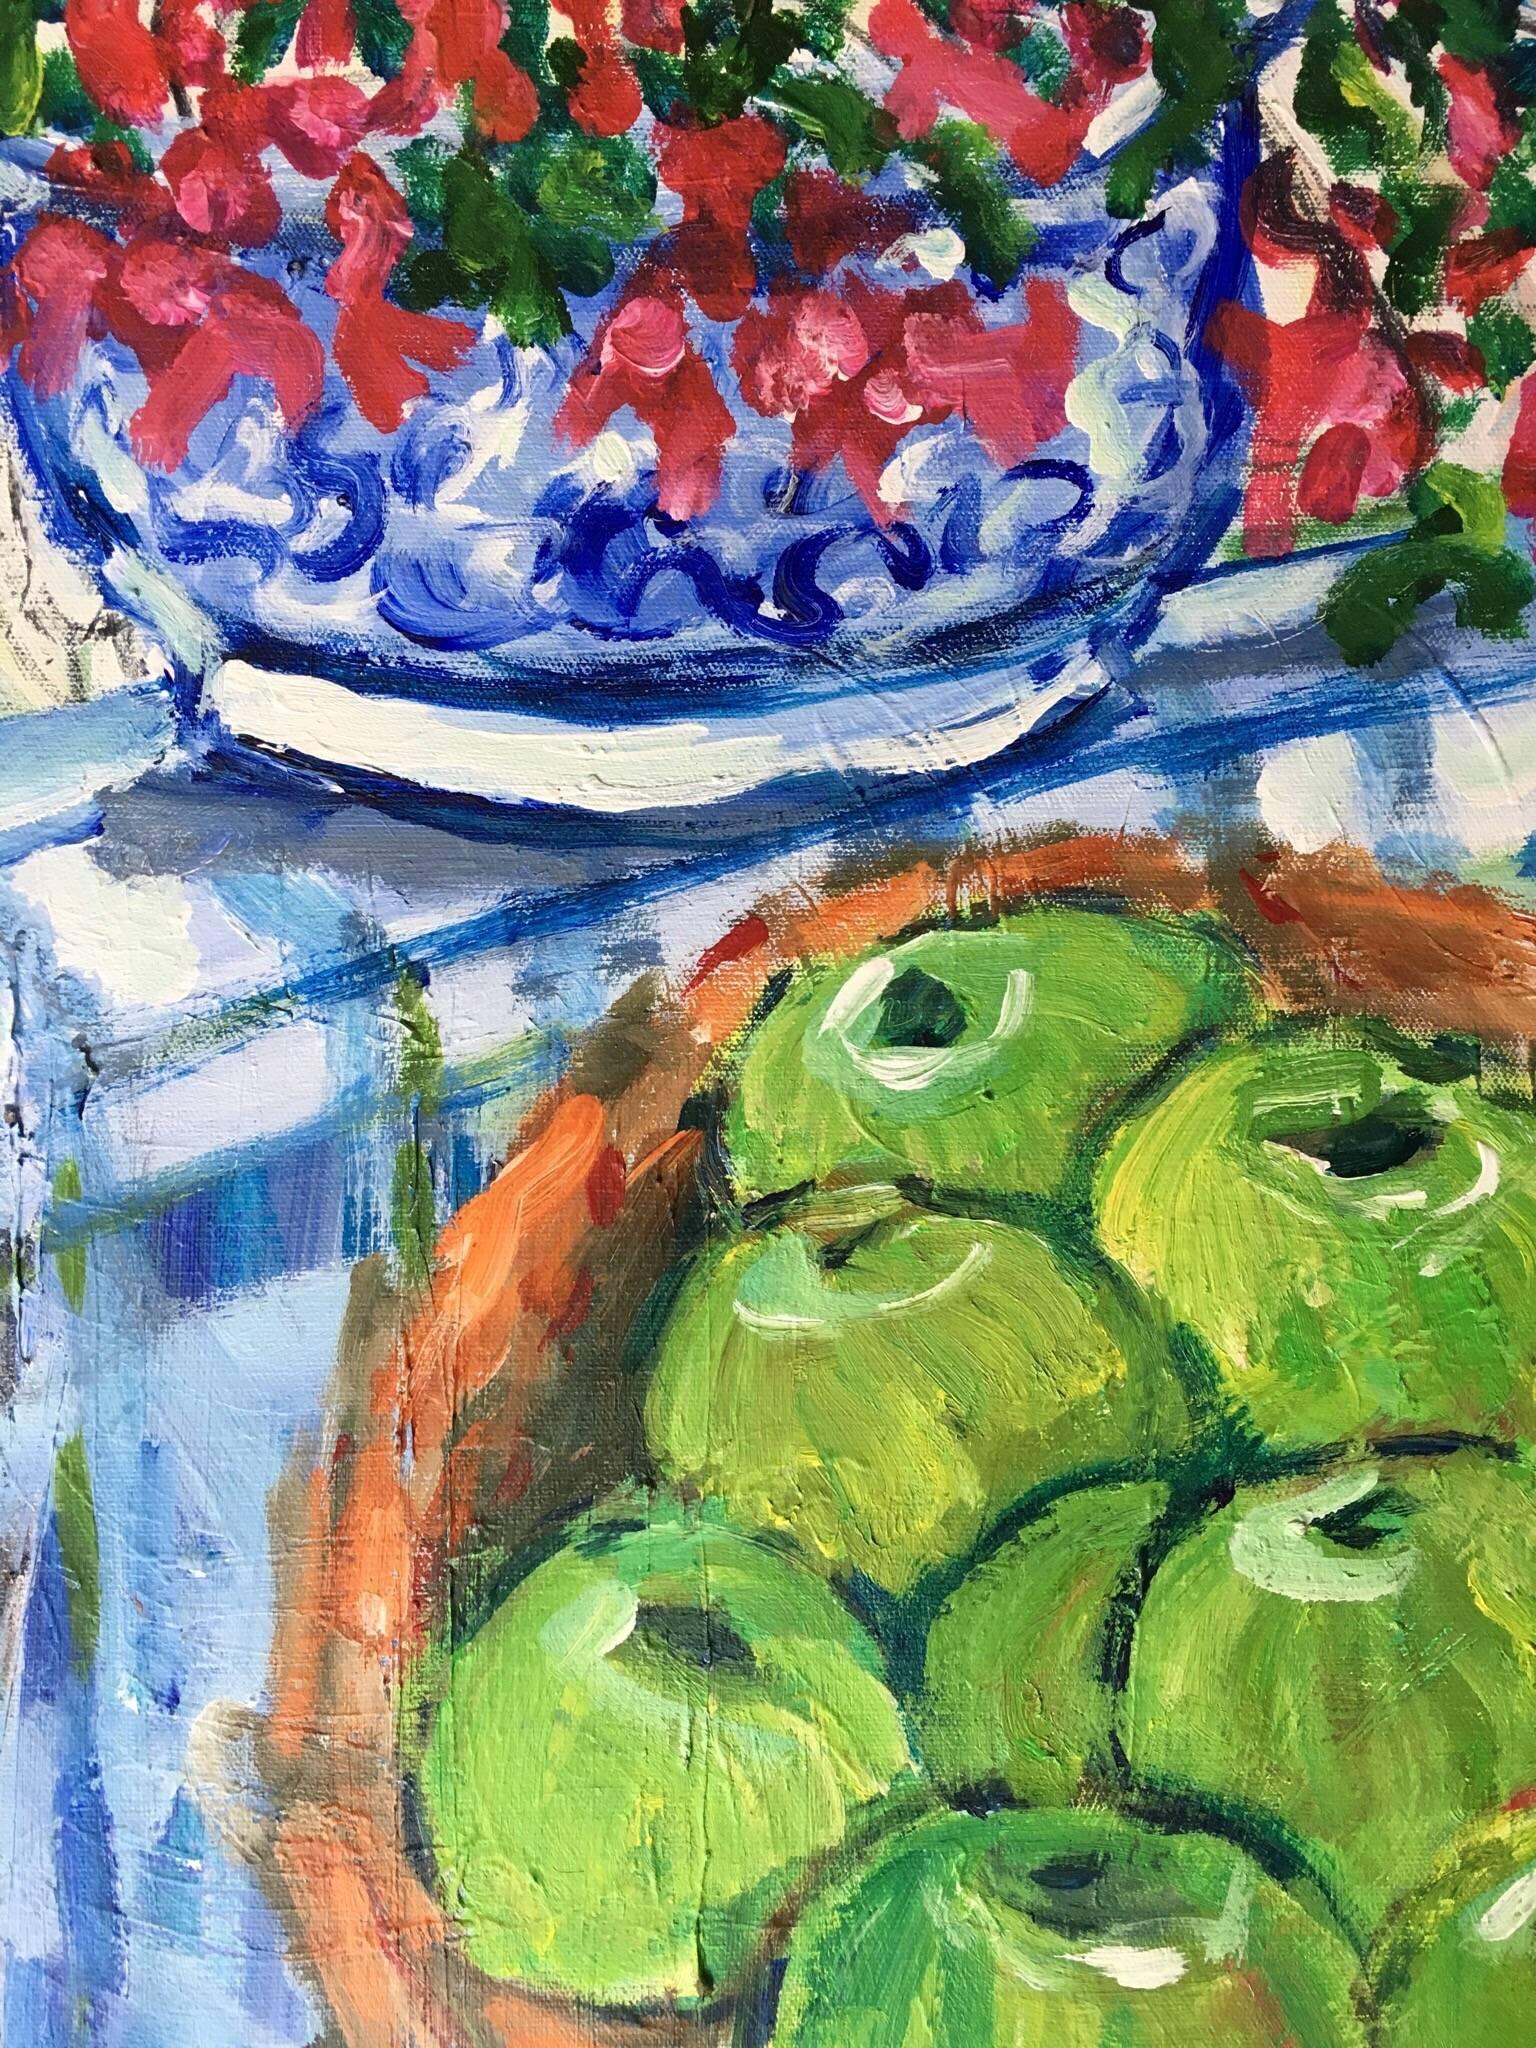 Impressionist Still Life Apples and Flowers, Oil Painting
by Pamela Cawley, British 20th century
oil painting on canvas, unframed
board: 20 x 16 inches 

Stunning original Impressionist oil painting by the 20th century British artist, Pamela Cawley.